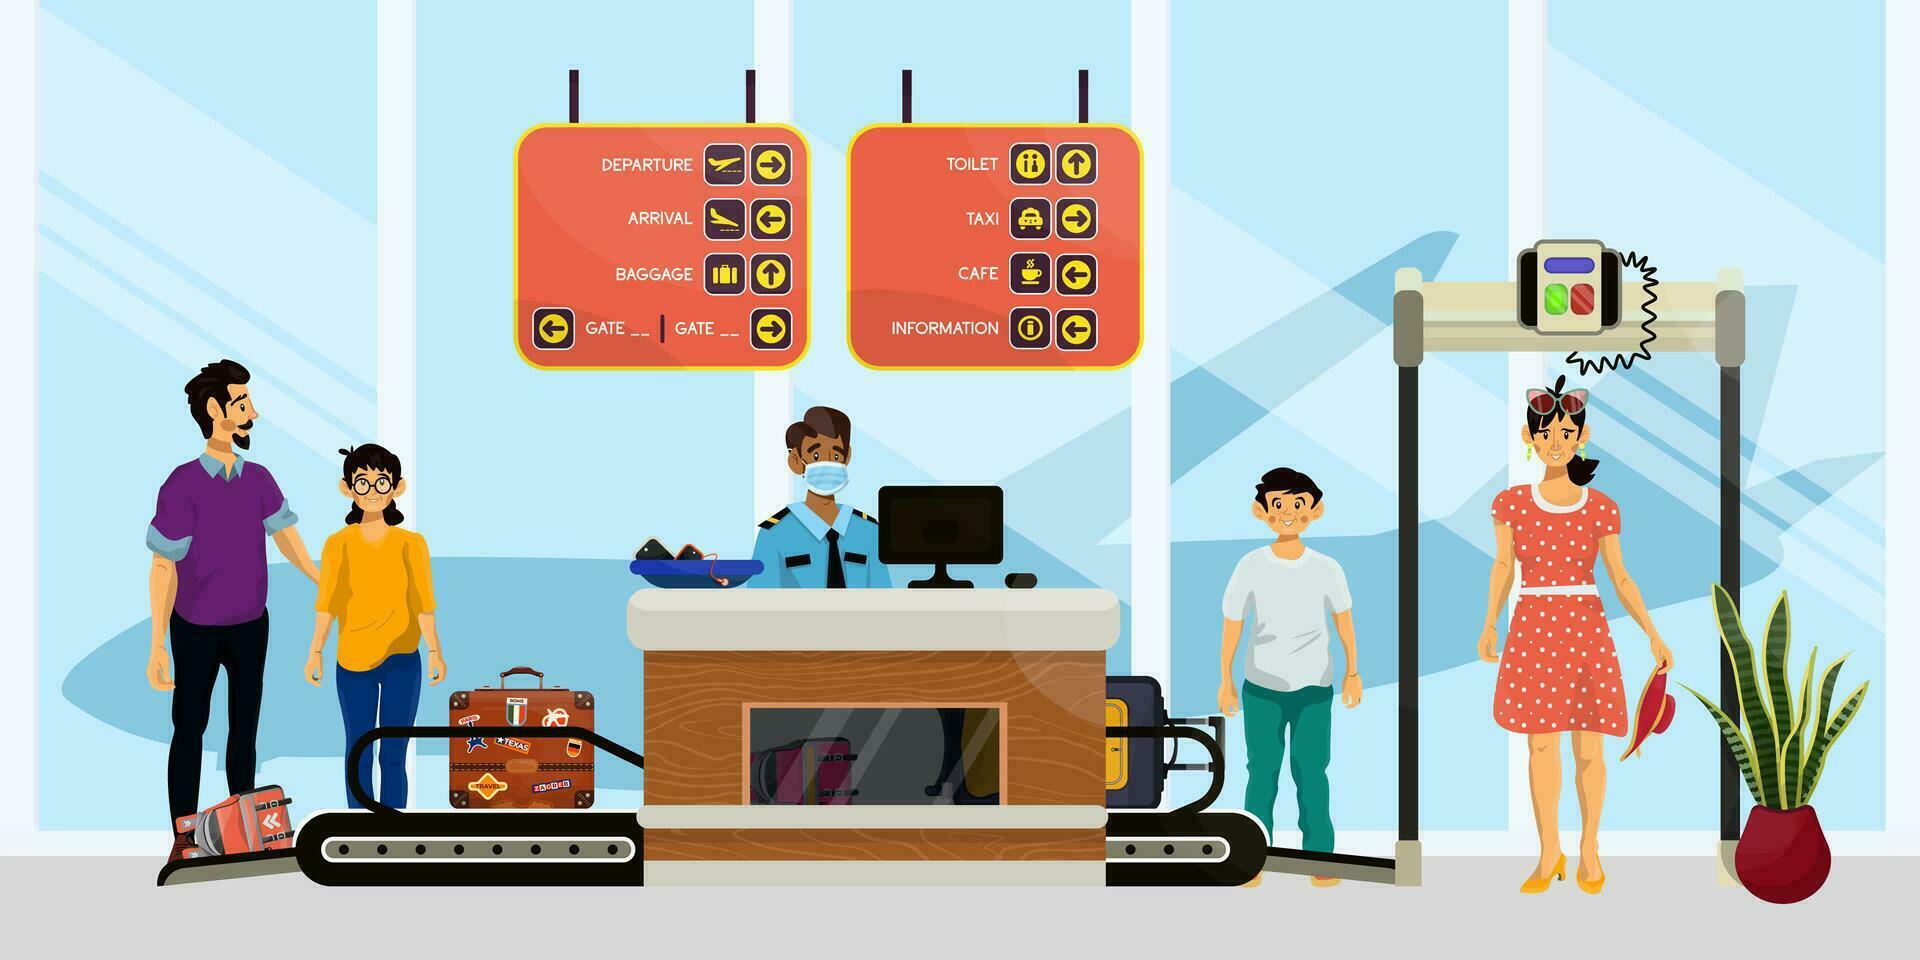 Cartoon illustration of airport inspection process. Vector concept of check equipment and people.